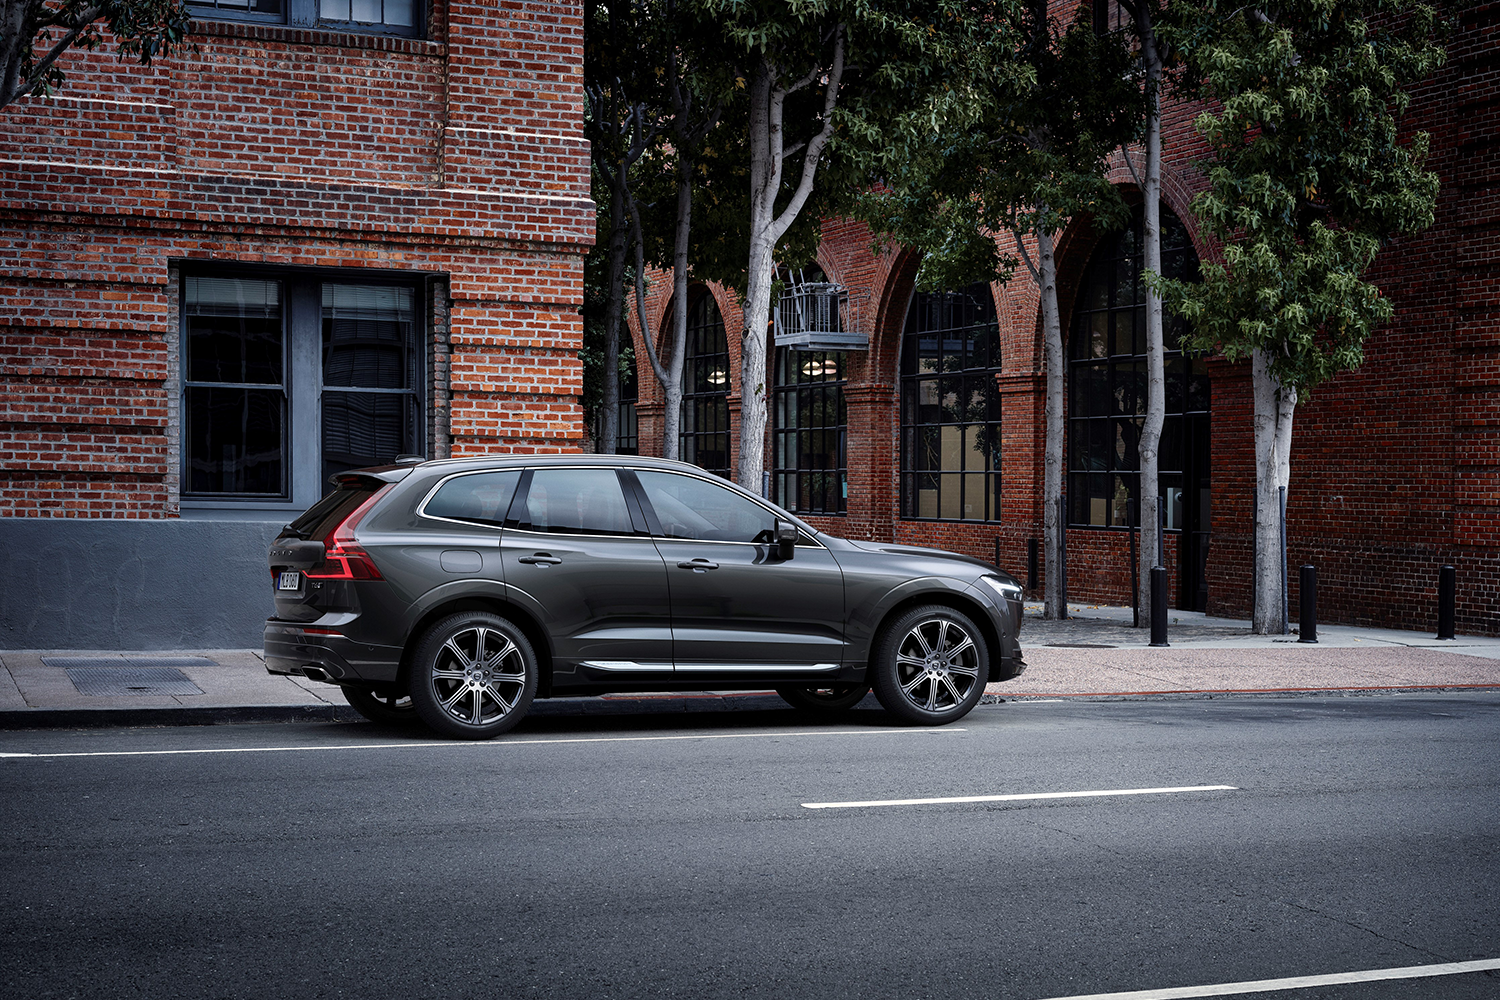 volvo lex kerssemakers interview news quotes insight xc60 6